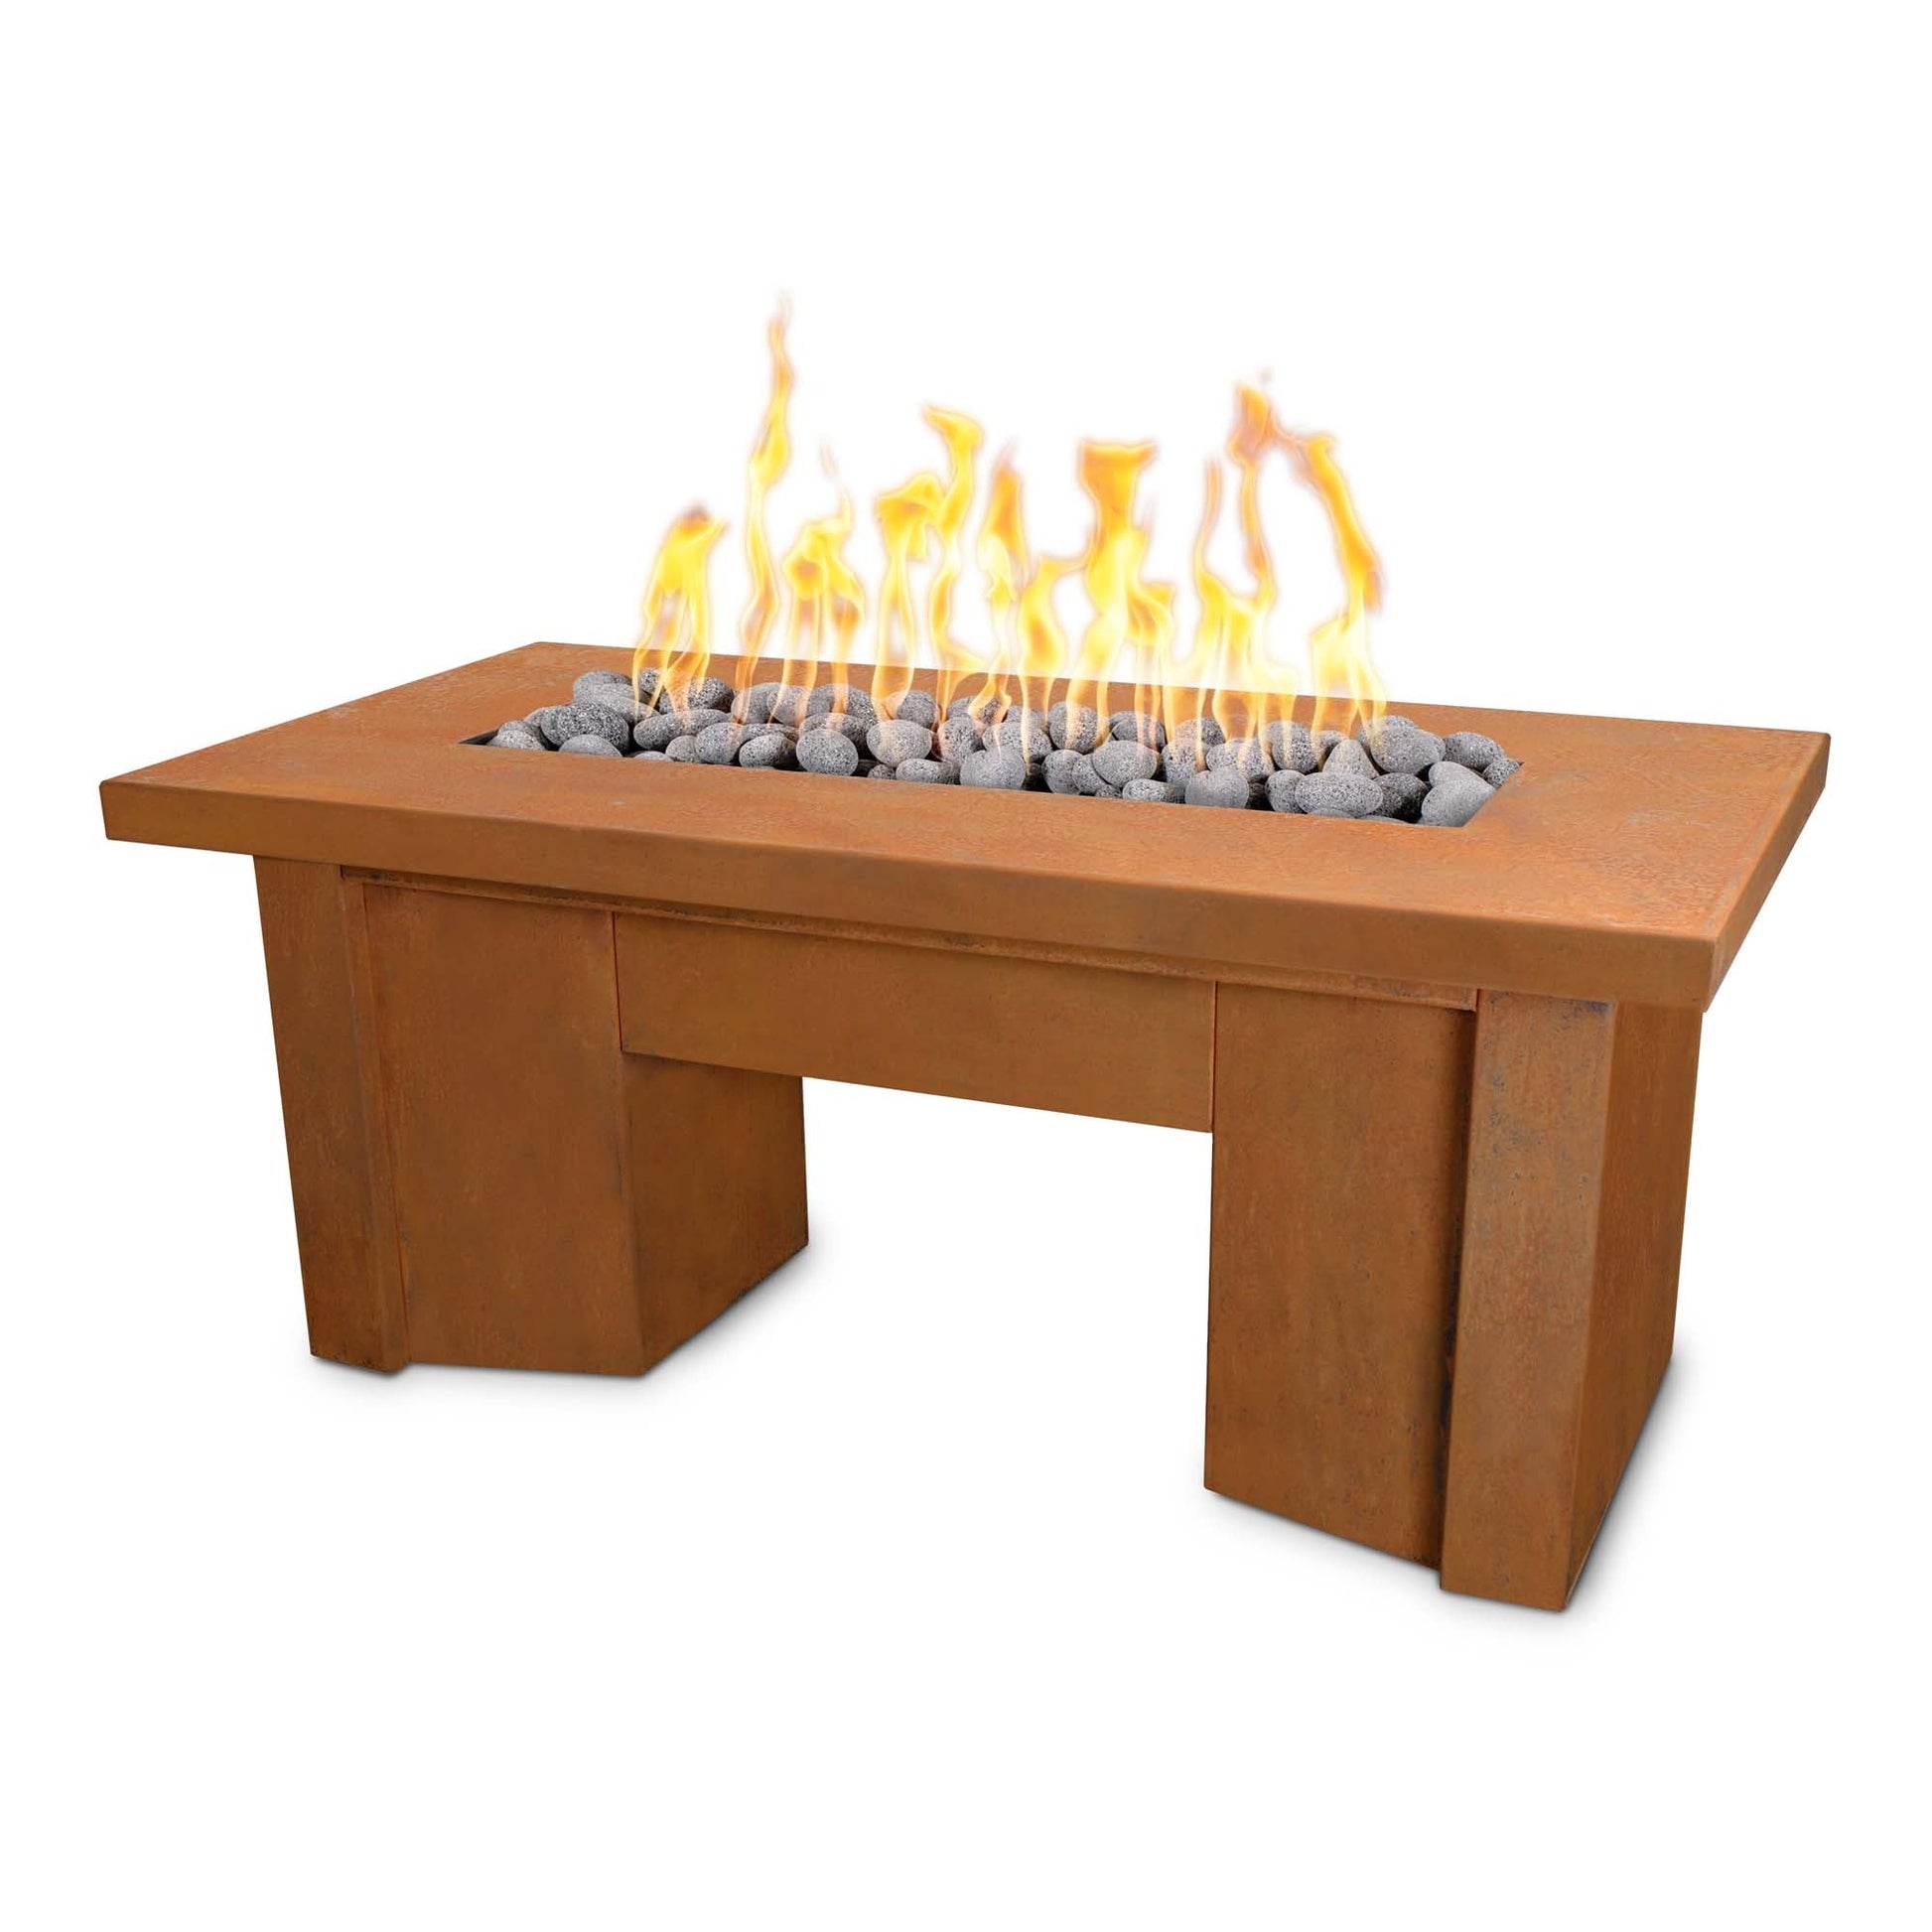 The Outdoor Plus Rectangular Alameda 60" Corten Steel Liquid Propane Fire Pit with Match Lit Ignition